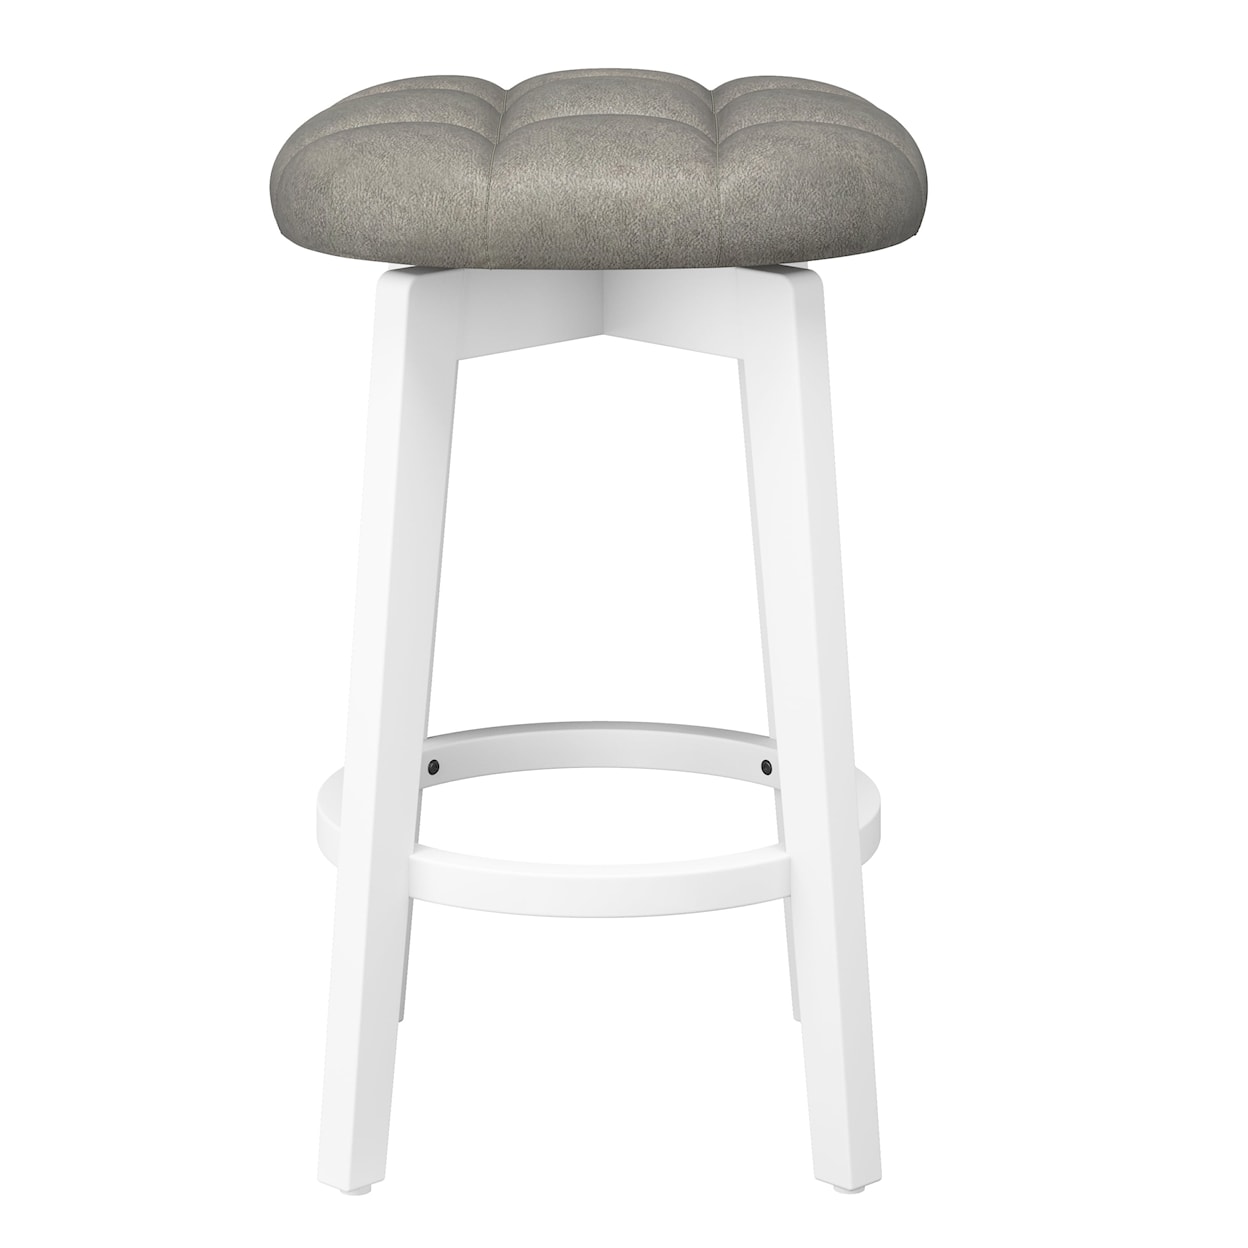 Hillsdale Odette Counter and Bar Stools